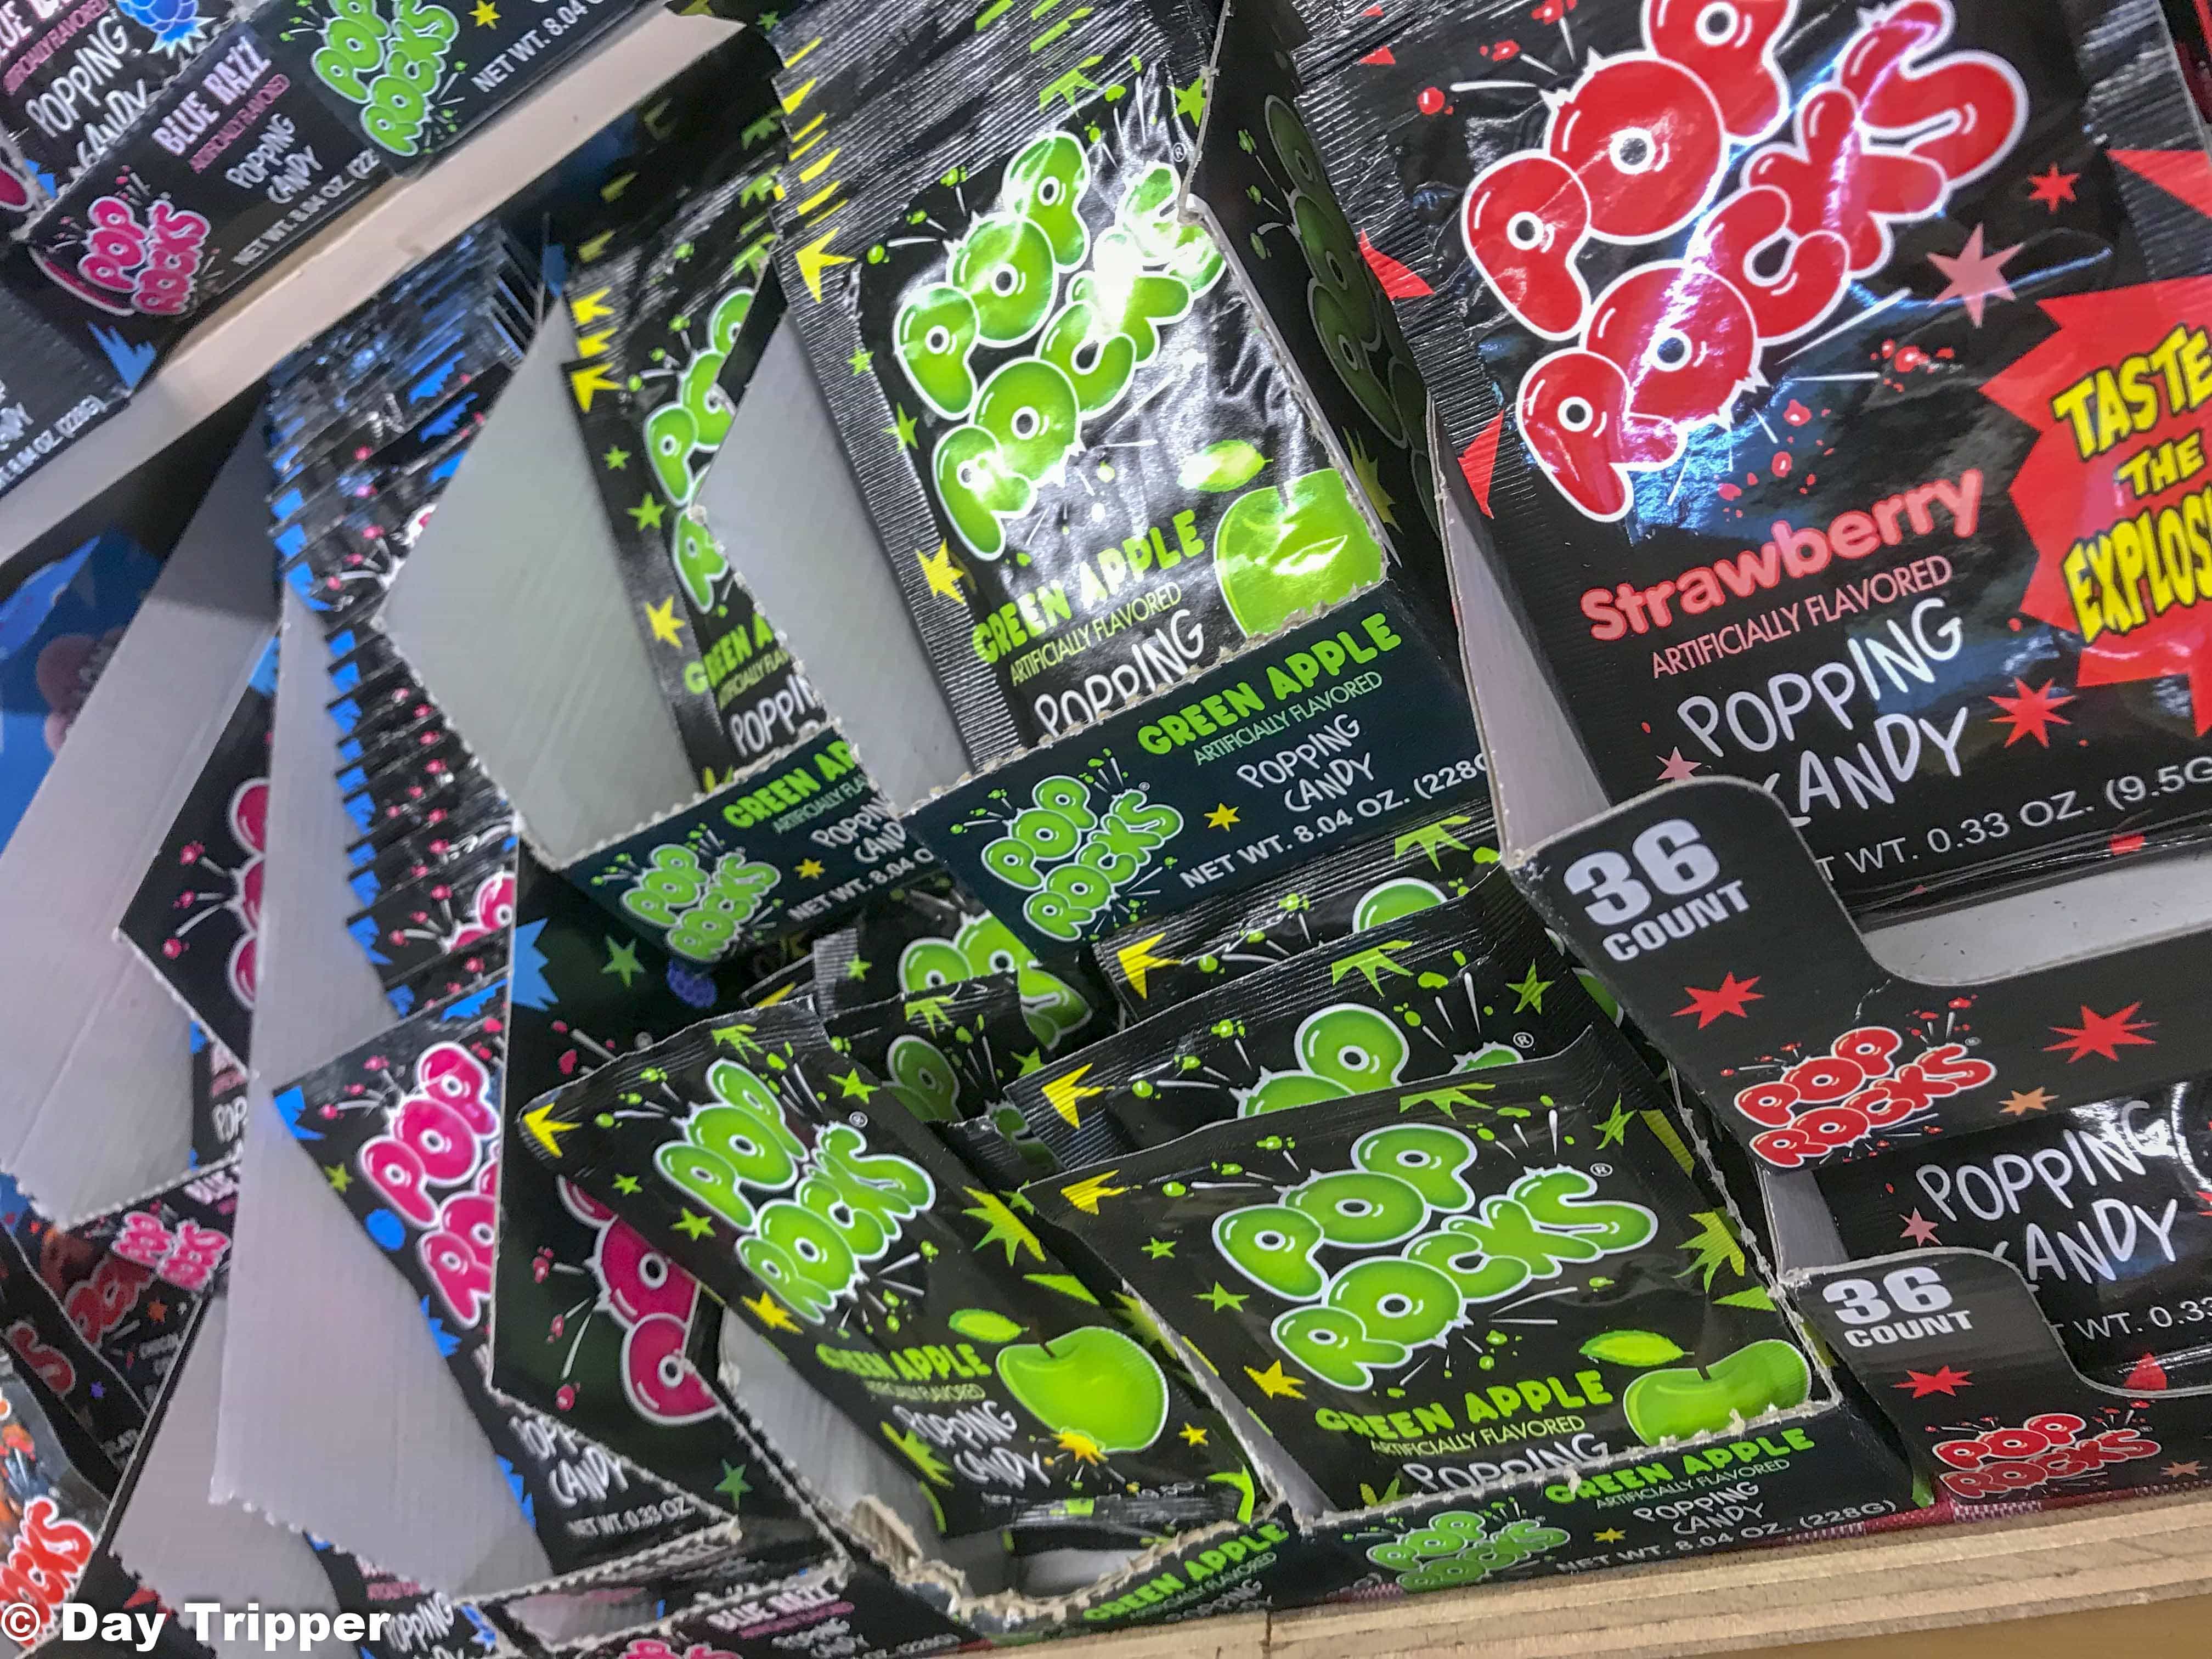 Pop Rocks at Minnesota's Largest Candy Store